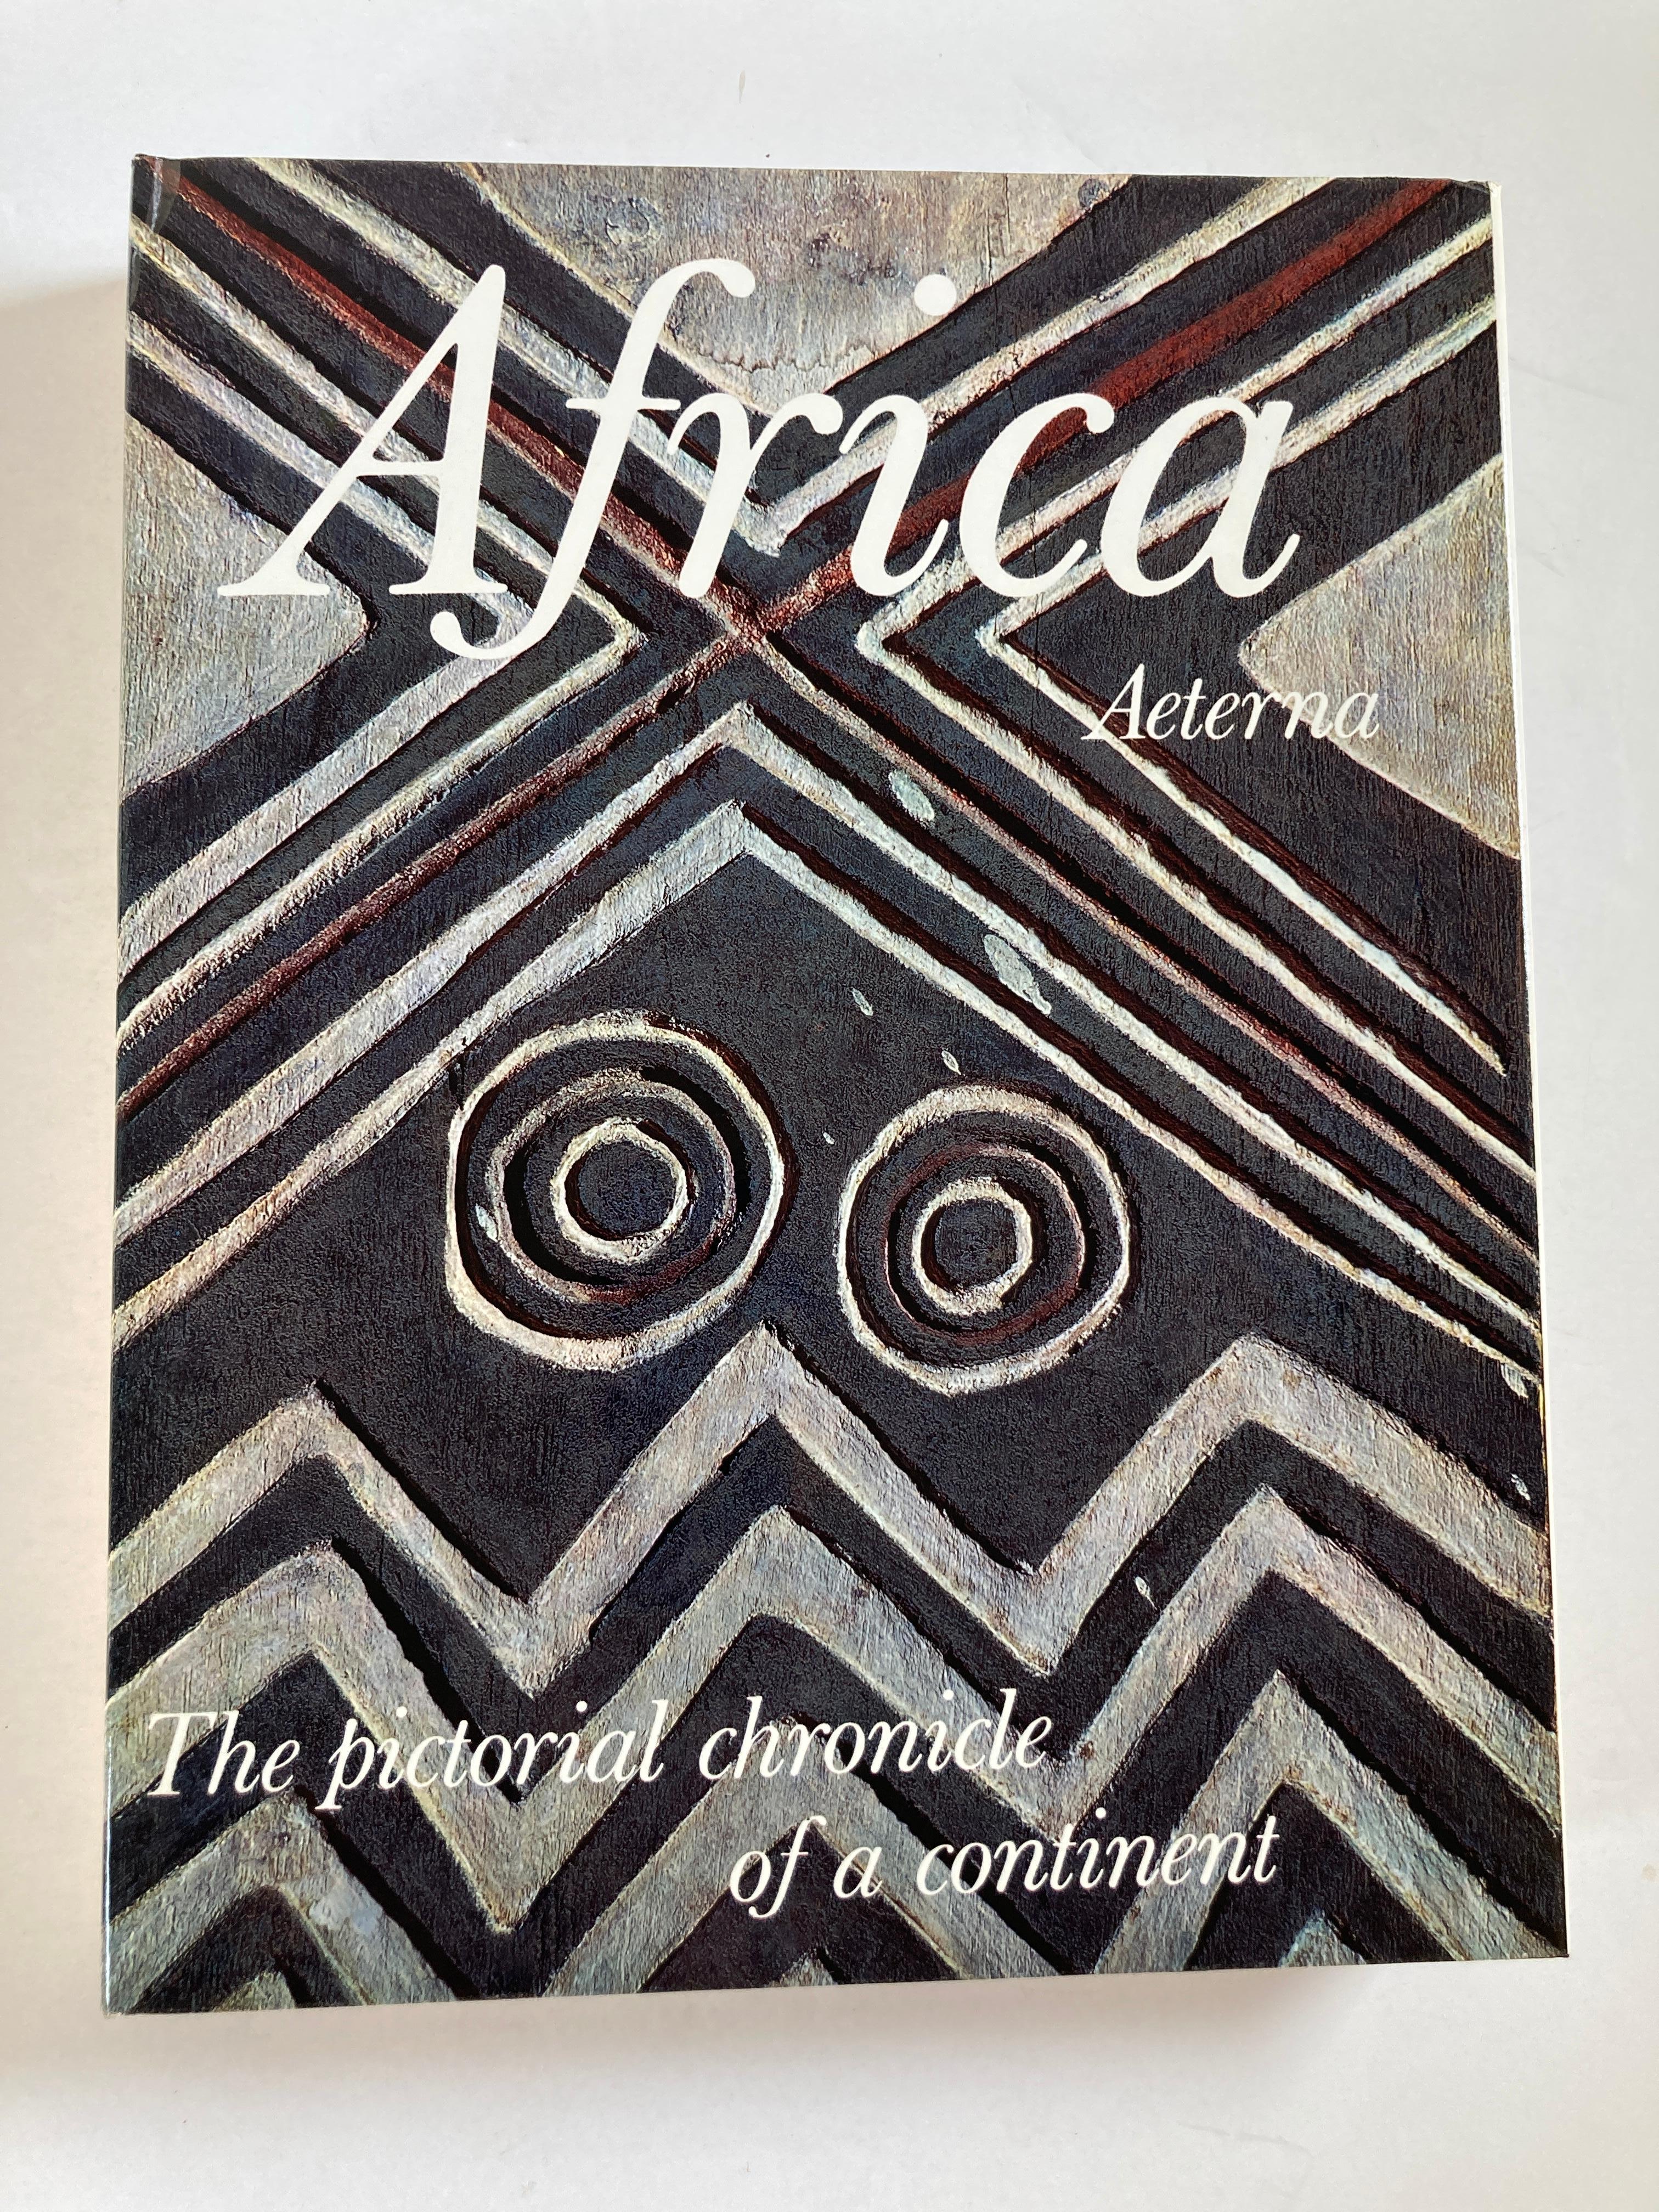 Africa Aeterna The Pictorial Chronicle of a Continent
New York: International Book Society Time Life Books, 1965. 
Henry, Paul Marc; Carmichael, Joel (translator)
Published by Sedo S.A., Lausanne, Switzerland, 1965
First Edition; First Printing.